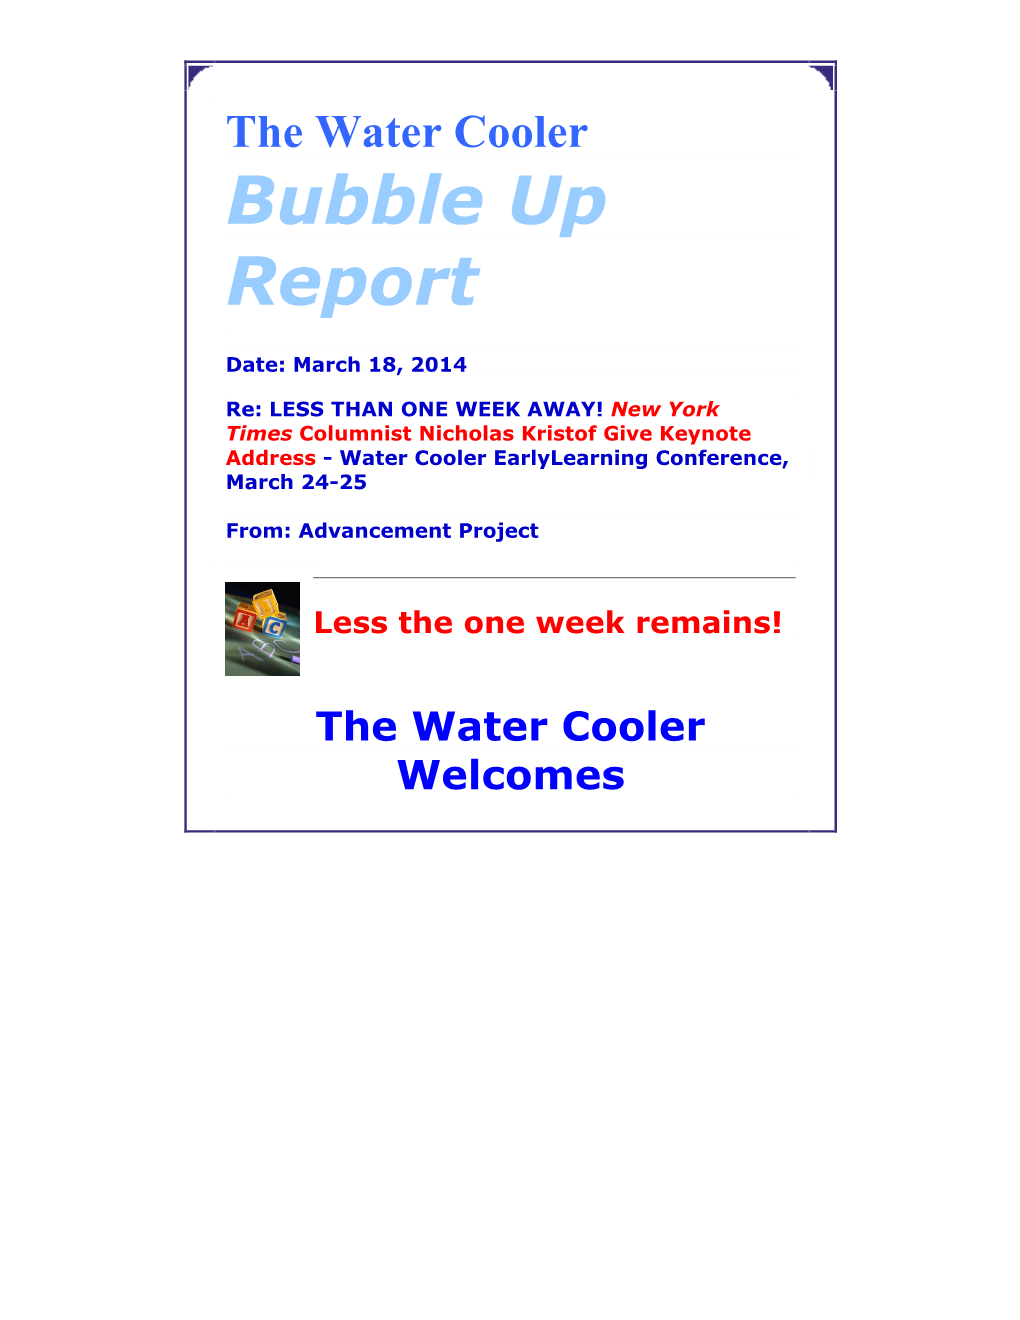 The Water Cooler Bubble up Report